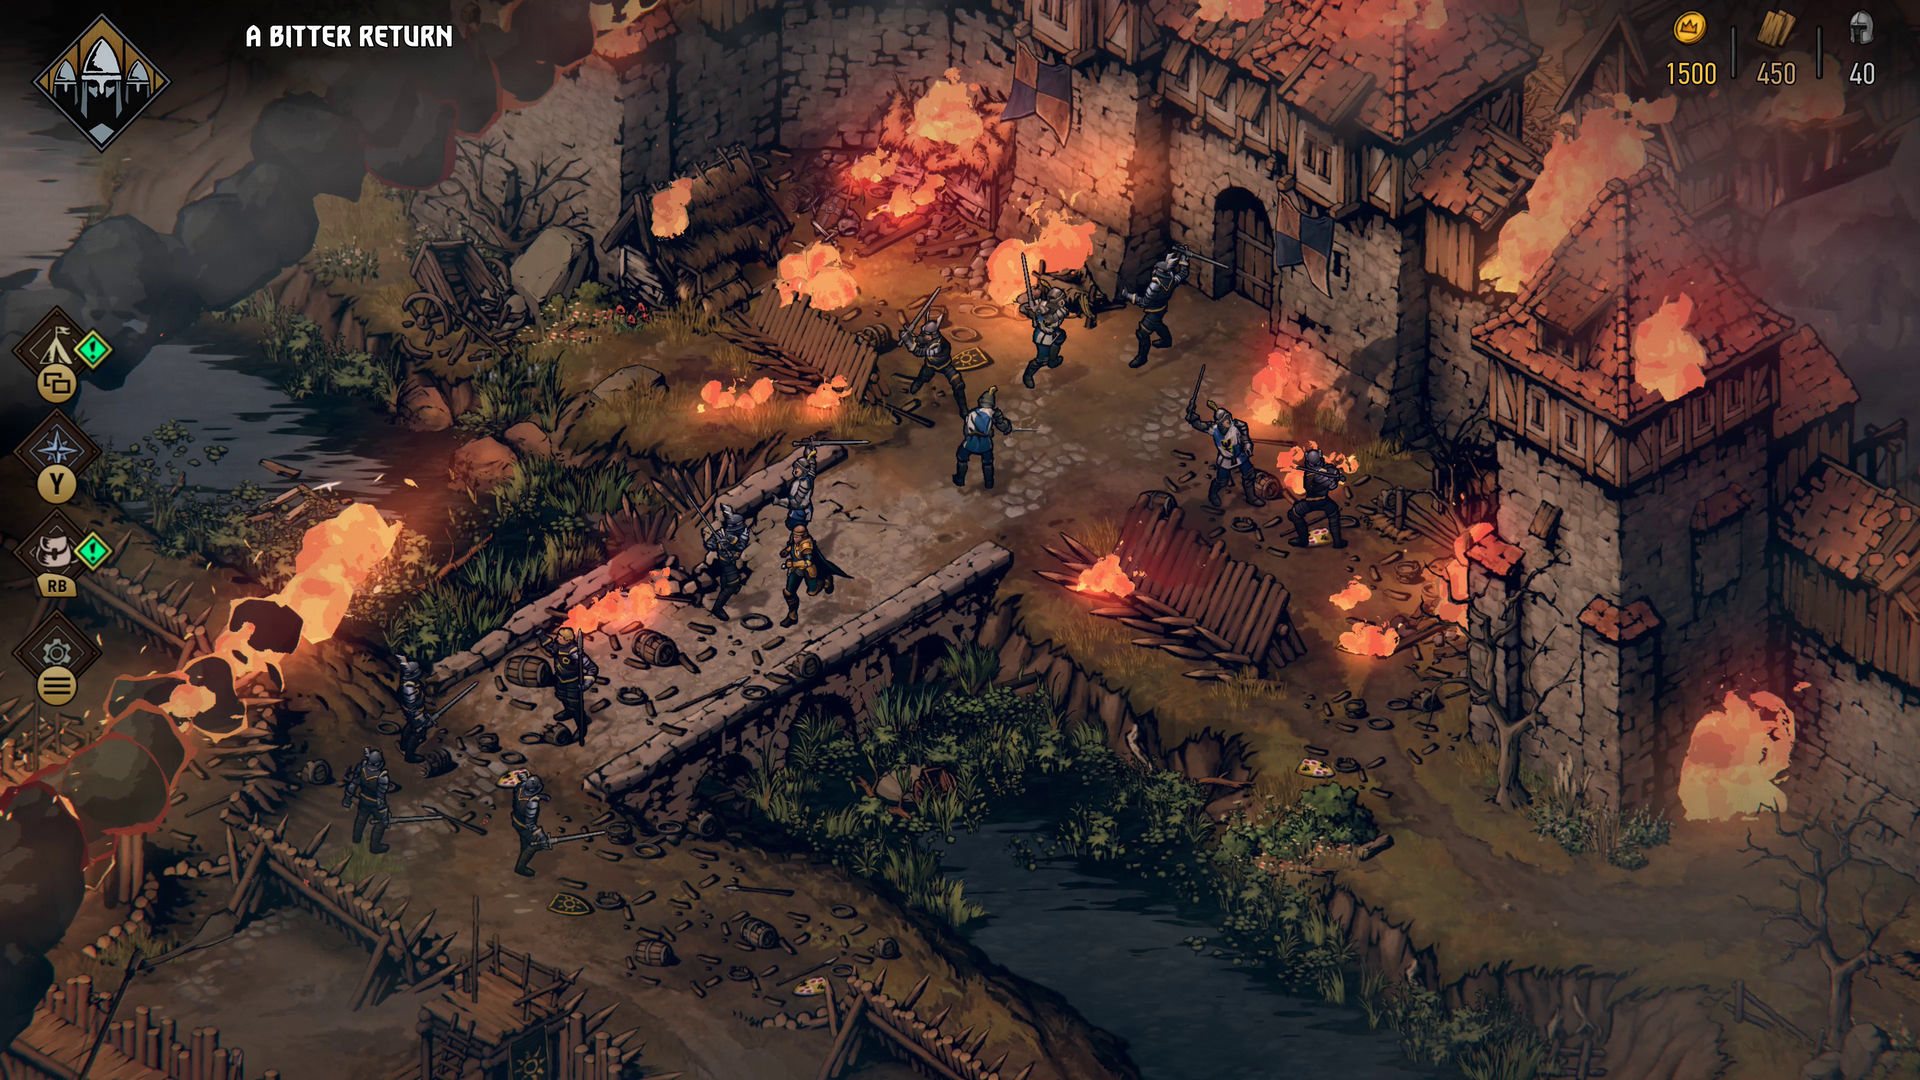 Thronebreaker: The Witcher Tales GOG CD Key